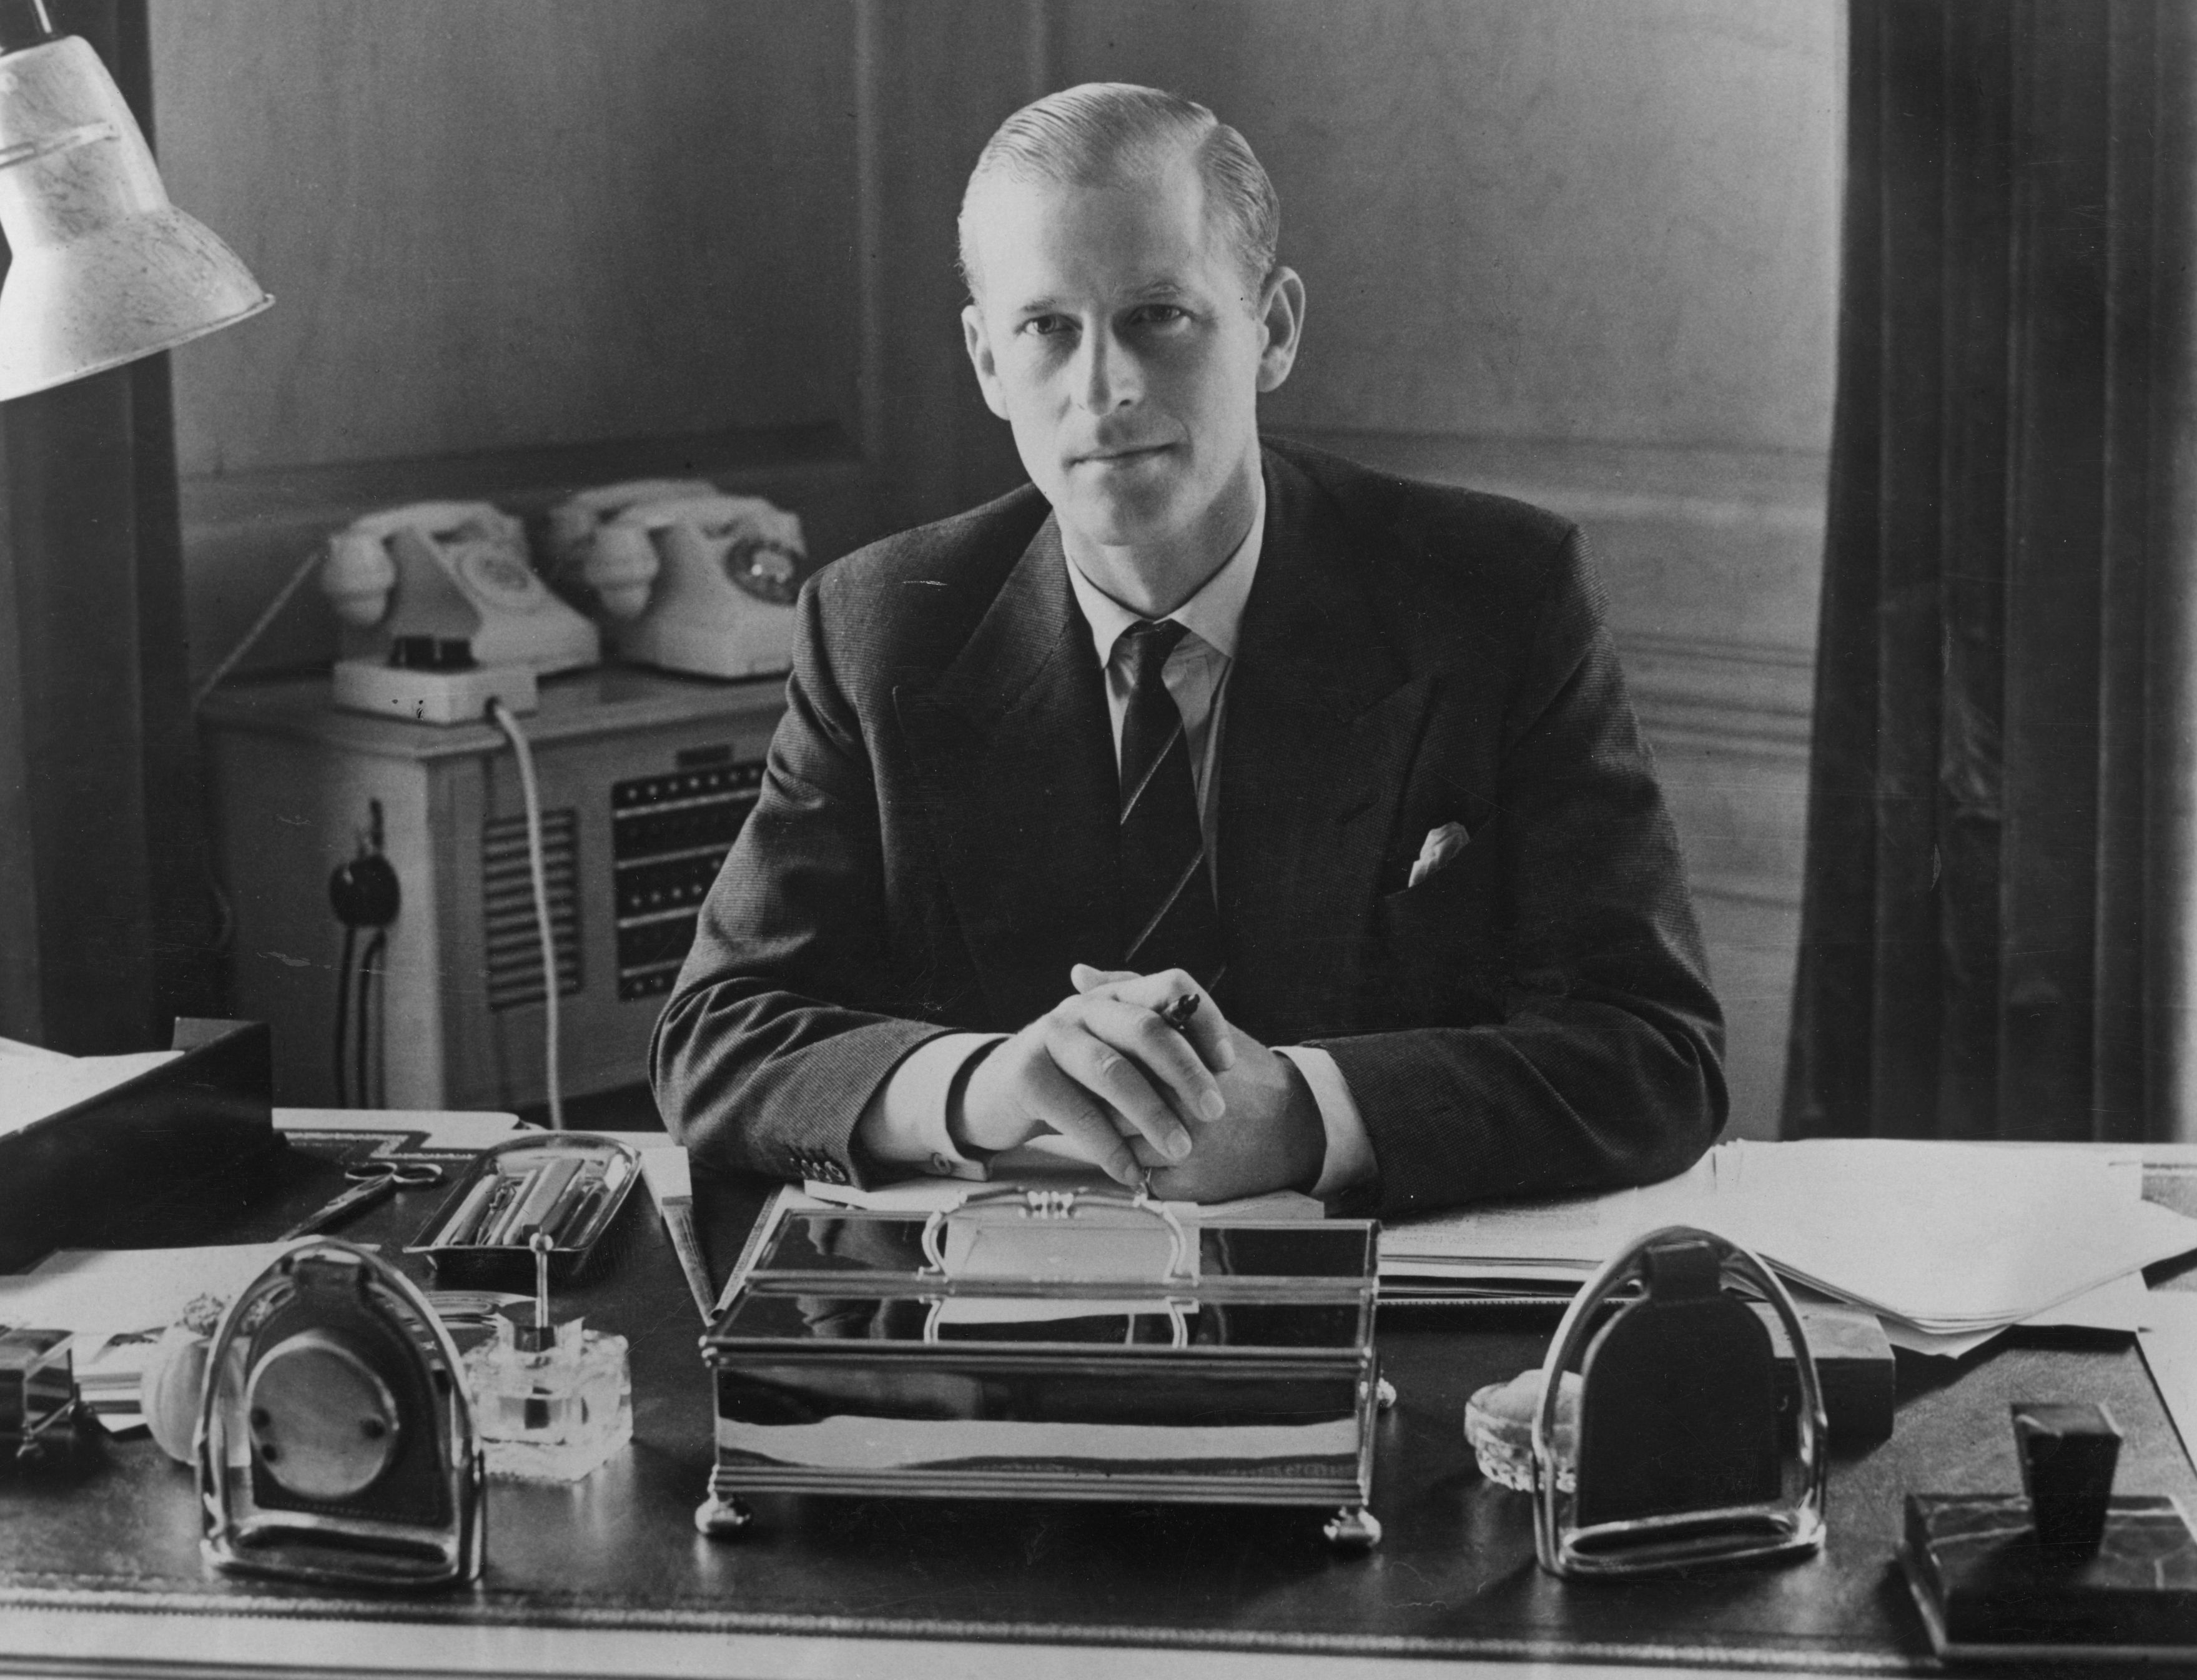 Prince Philip pictured at his desk at Clarence House, 1951, England. | Photo: Getty Images